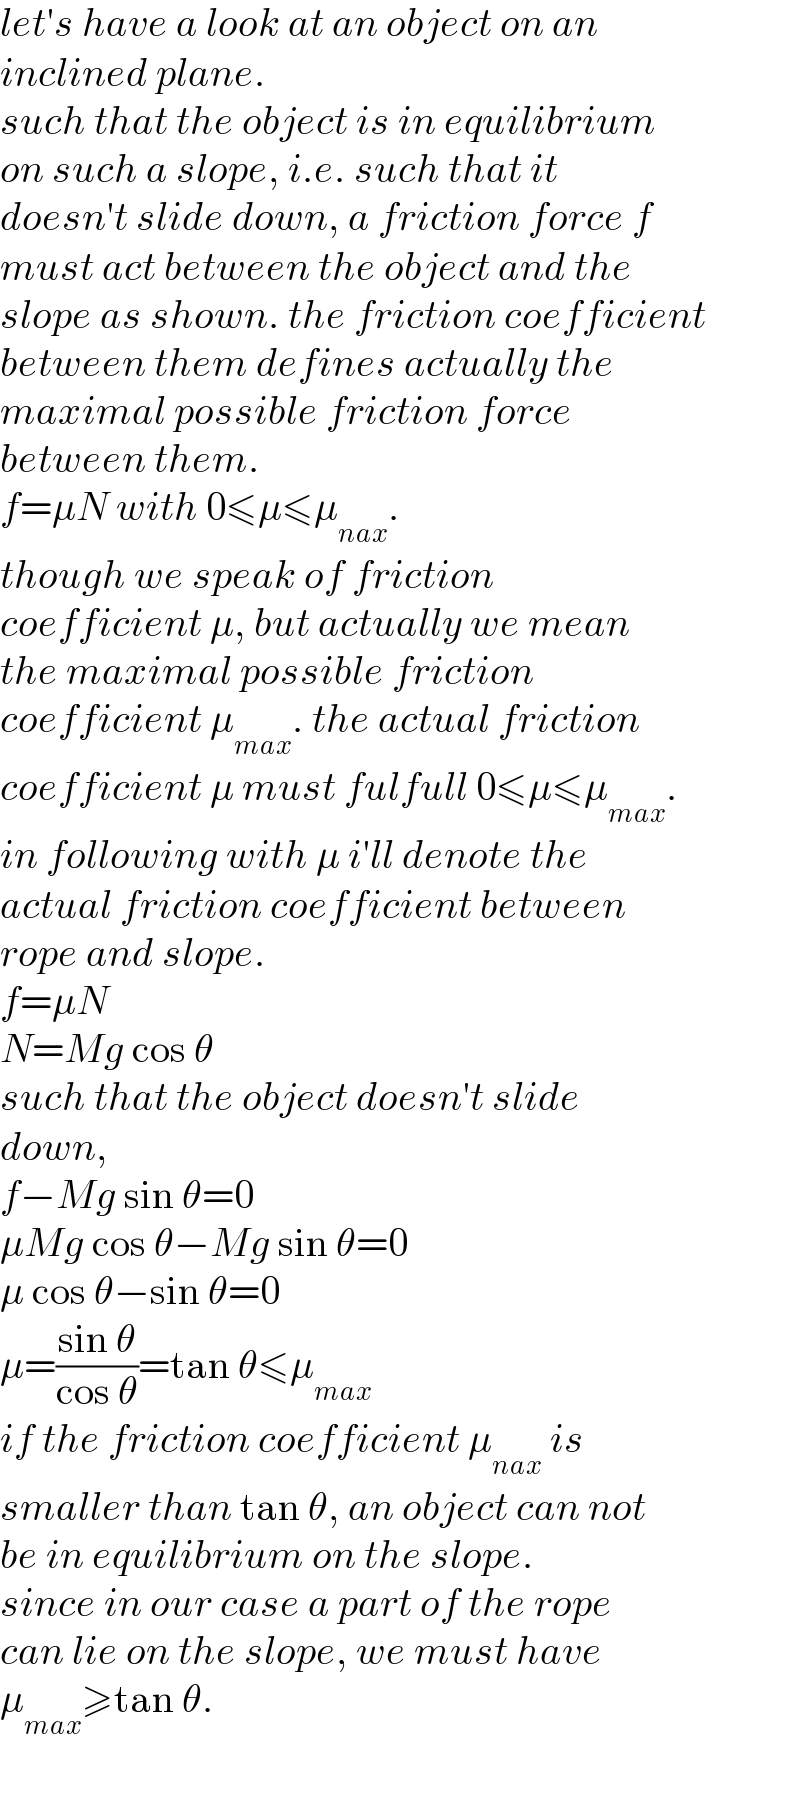 let′s have a look at an object on an  inclined plane.  such that the object is in equilibrium  on such a slope, i.e. such that it  doesn′t slide down, a friction force f  must act between the object and the  slope as shown. the friction coefficient  between them defines actually the   maximal possible friction force   between them.  f=μN with 0≤μ≤μ_(nax) .  though we speak of friction  coefficient μ, but actually we mean  the maximal possible friction  coefficient μ_(max) . the actual friction  coefficient μ must fulfull 0≤μ≤μ_(max) .  in following with μ i′ll denote the  actual friction coefficient between  rope and slope.  f=μN  N=Mg cos θ  such that the object doesn′t slide  down,   f−Mg sin θ=0  μMg cos θ−Mg sin θ=0  μ cos θ−sin θ=0  μ=((sin θ)/(cos θ))=tan θ≤μ_(max)   if the friction coefficient μ_(nax)  is  smaller than tan θ, an object can not  be in equilibrium on the slope.  since in our case a part of the rope  can lie on the slope, we must have   μ_(max) ≥tan θ.  